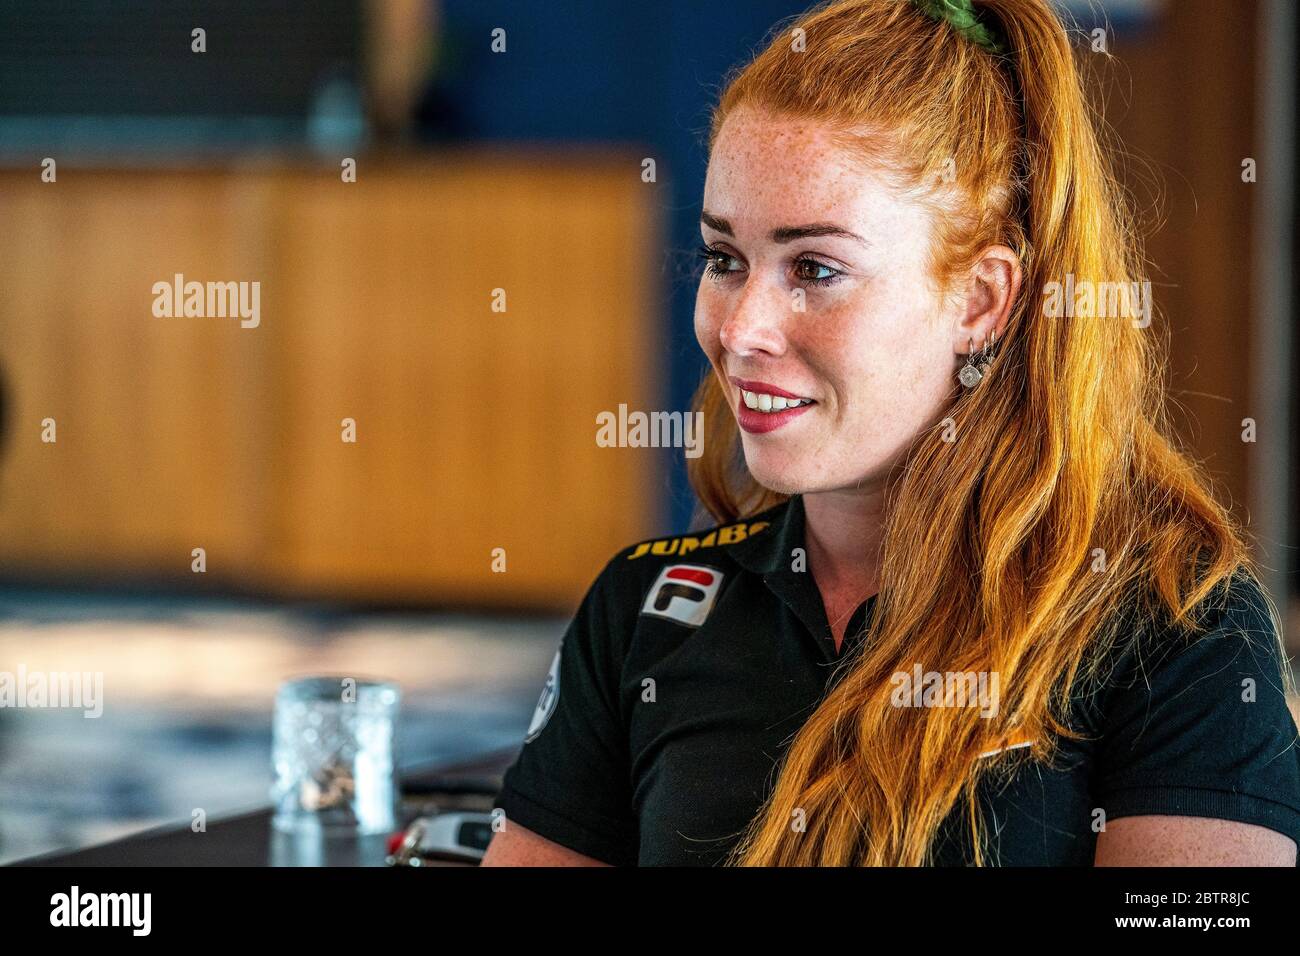 27 May 2020 Wolvega, The Netherlands Antoinette de Jong of Jumbo Visma seen  during a meeting with the press on May 27, 2020 in Wolvega, The Netherlands  Stock Photo - Alamy